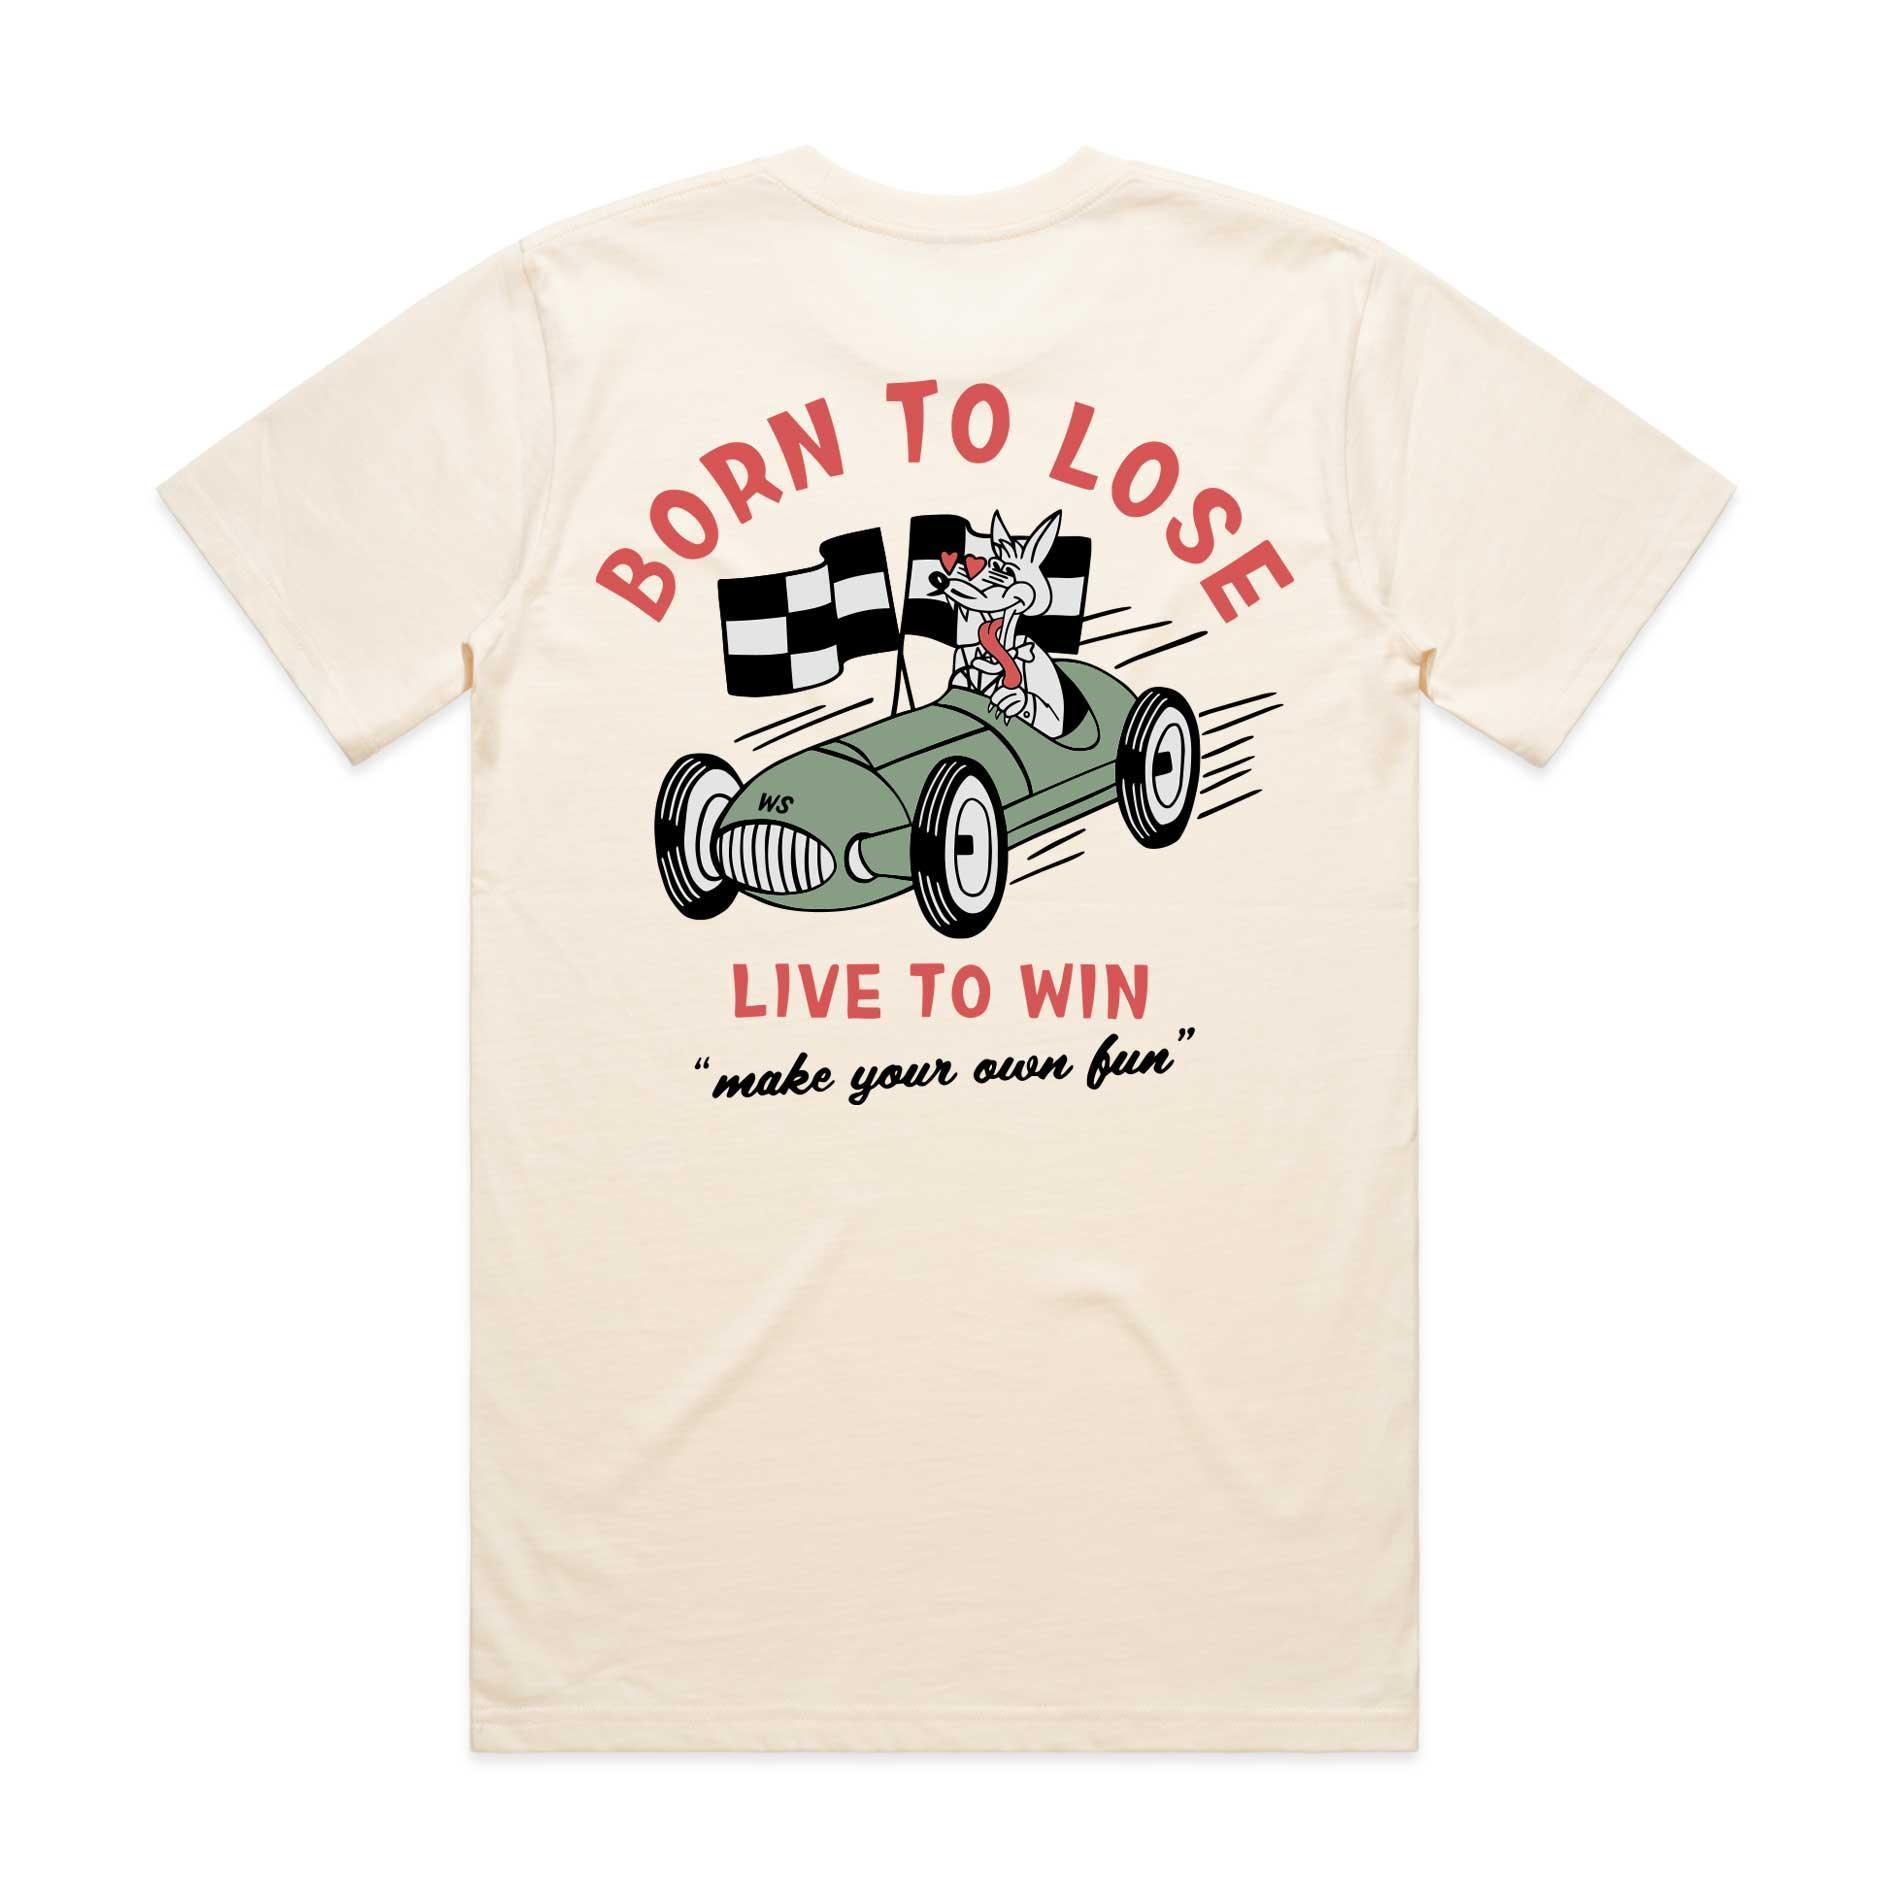 Born to Lose T-Shirt - Watershed Brand